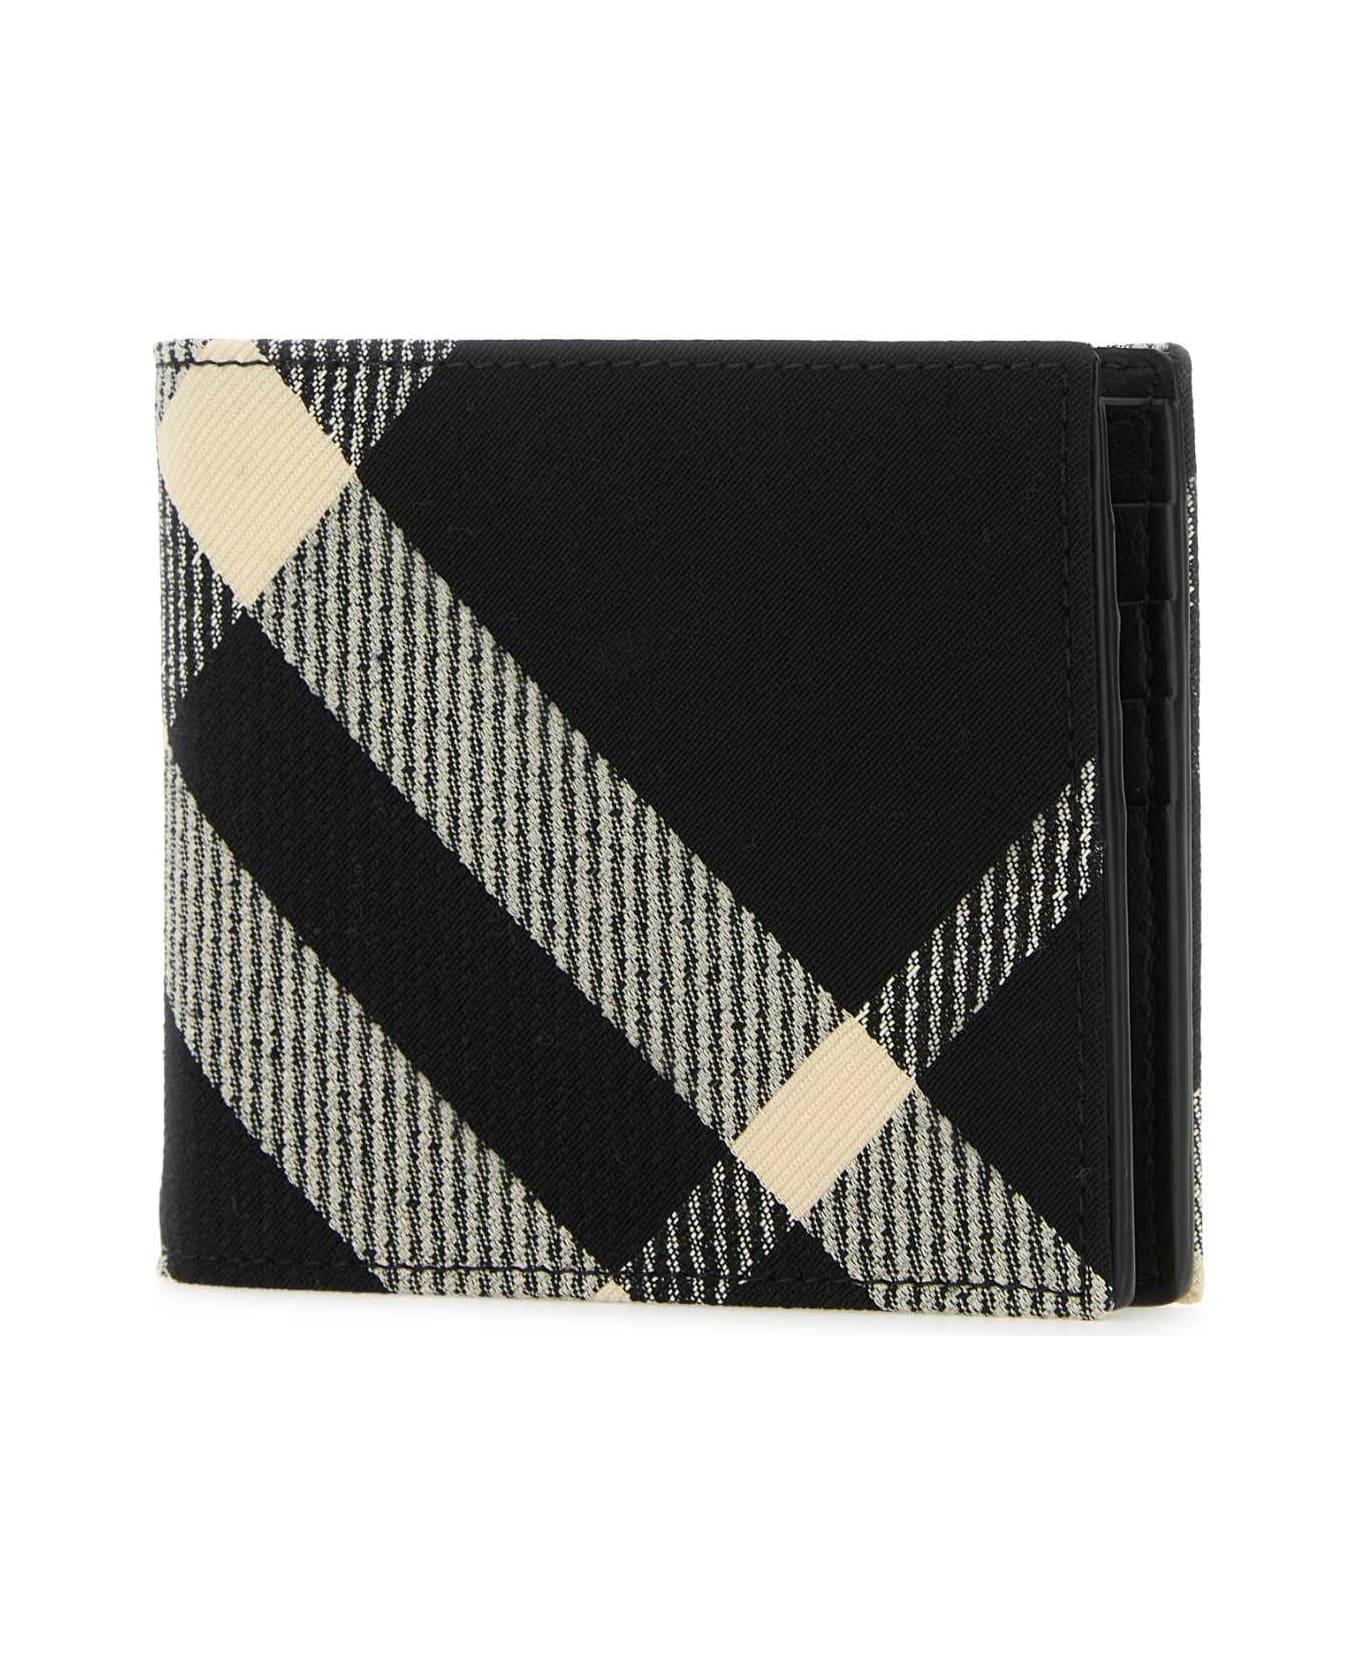 Burberry Embroidered Canvas Wallet - BLACKCALICO